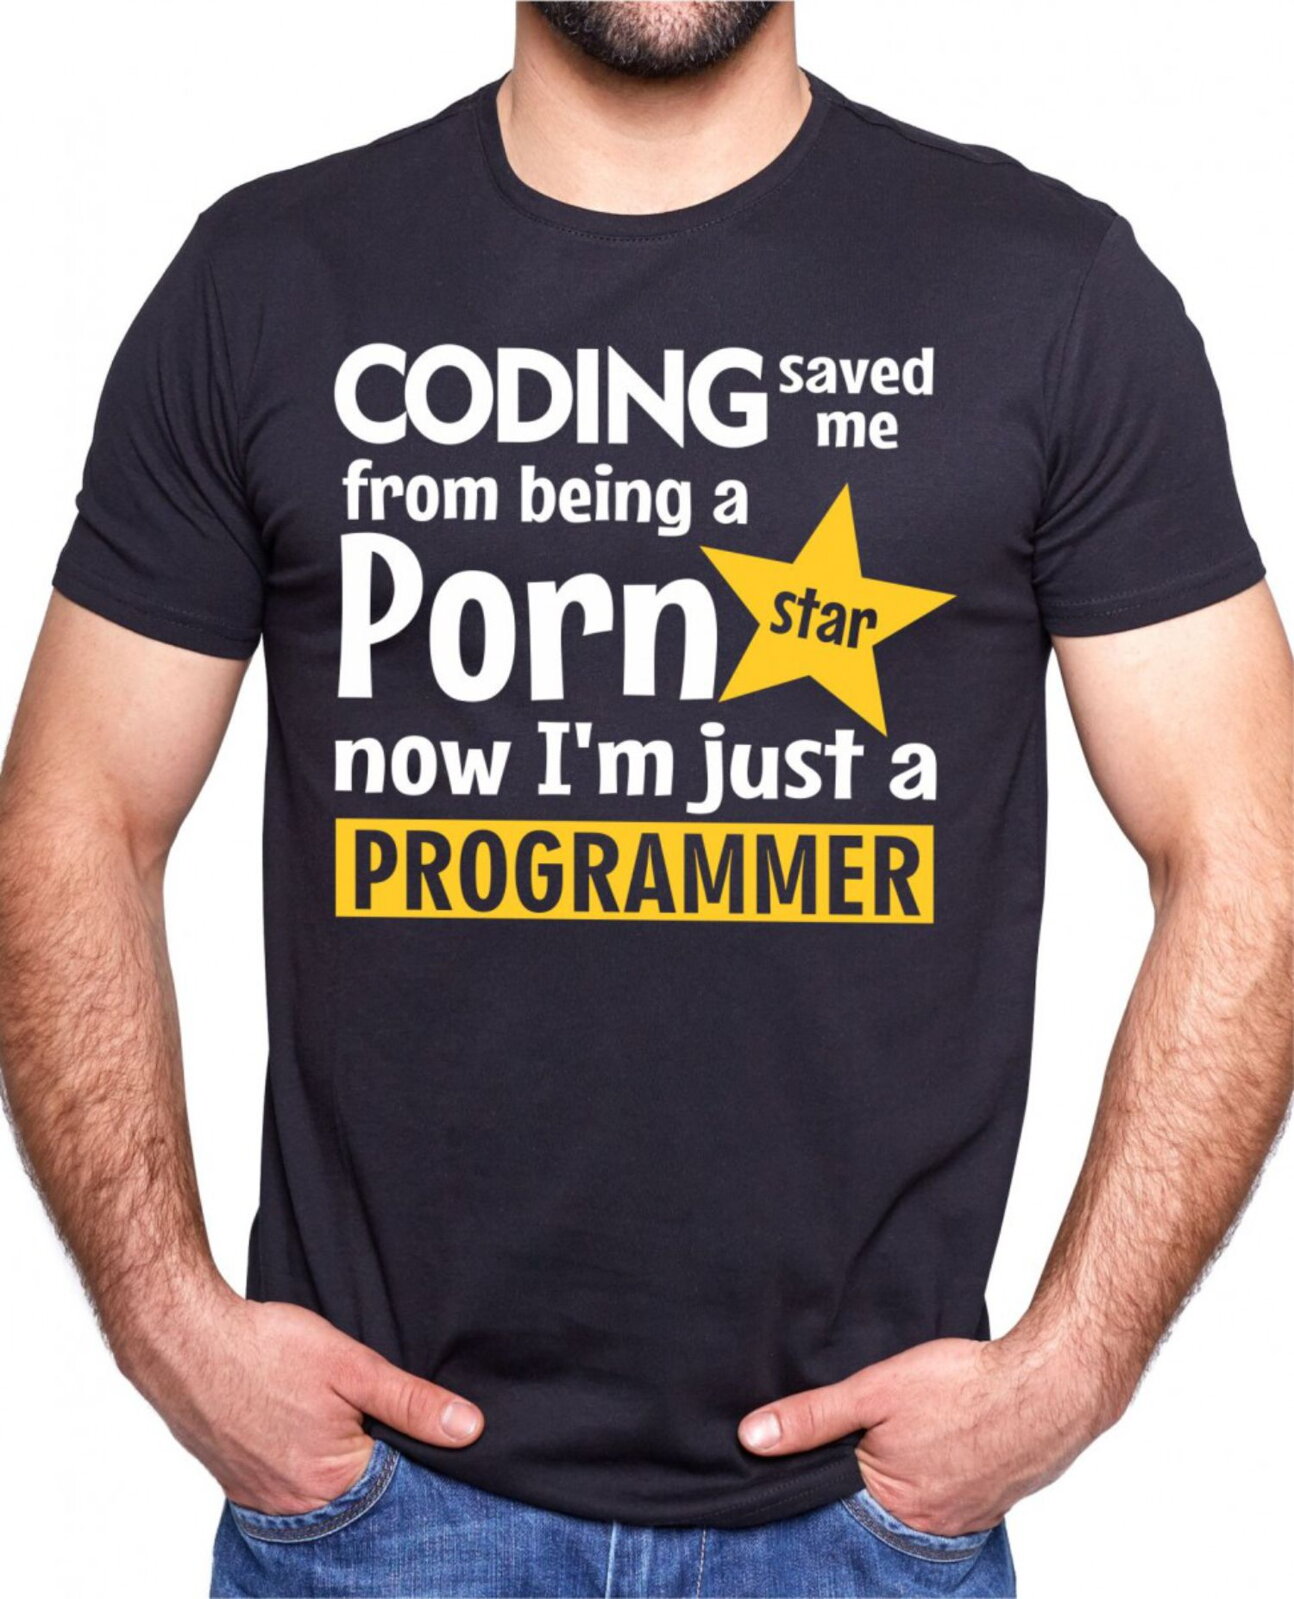 axis breaking Dawn Guidelines T-shirt - Coding saved me from being a Porn star ǀ Fajntričko.com